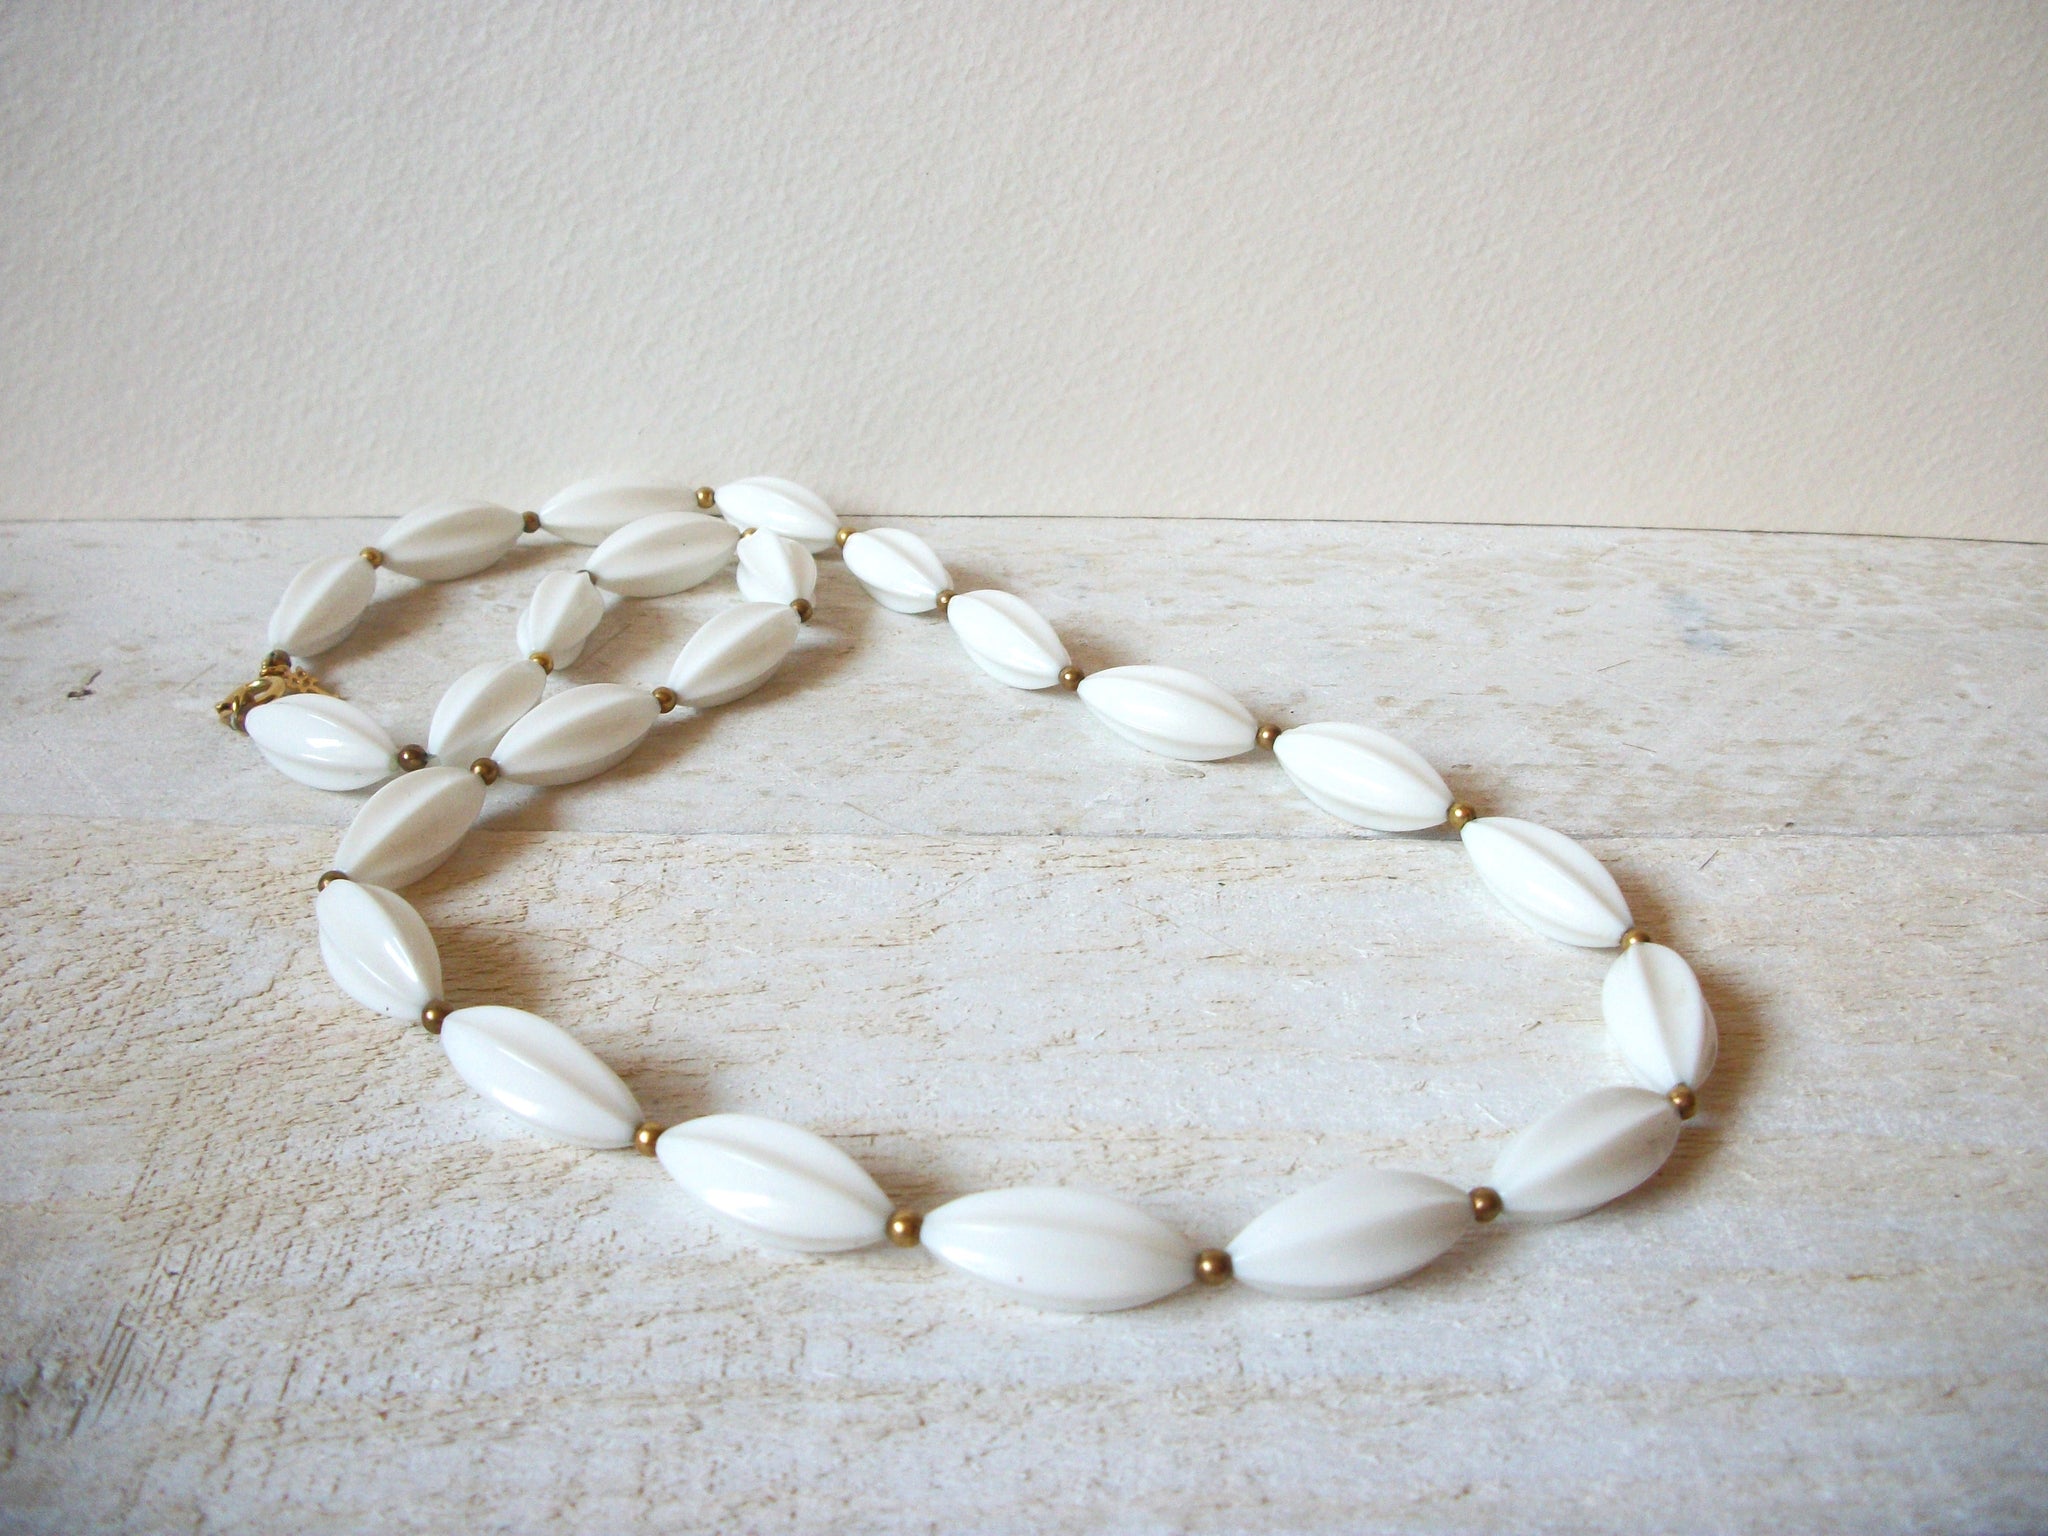 Vintage White Watermelon Beads Necklace 61920